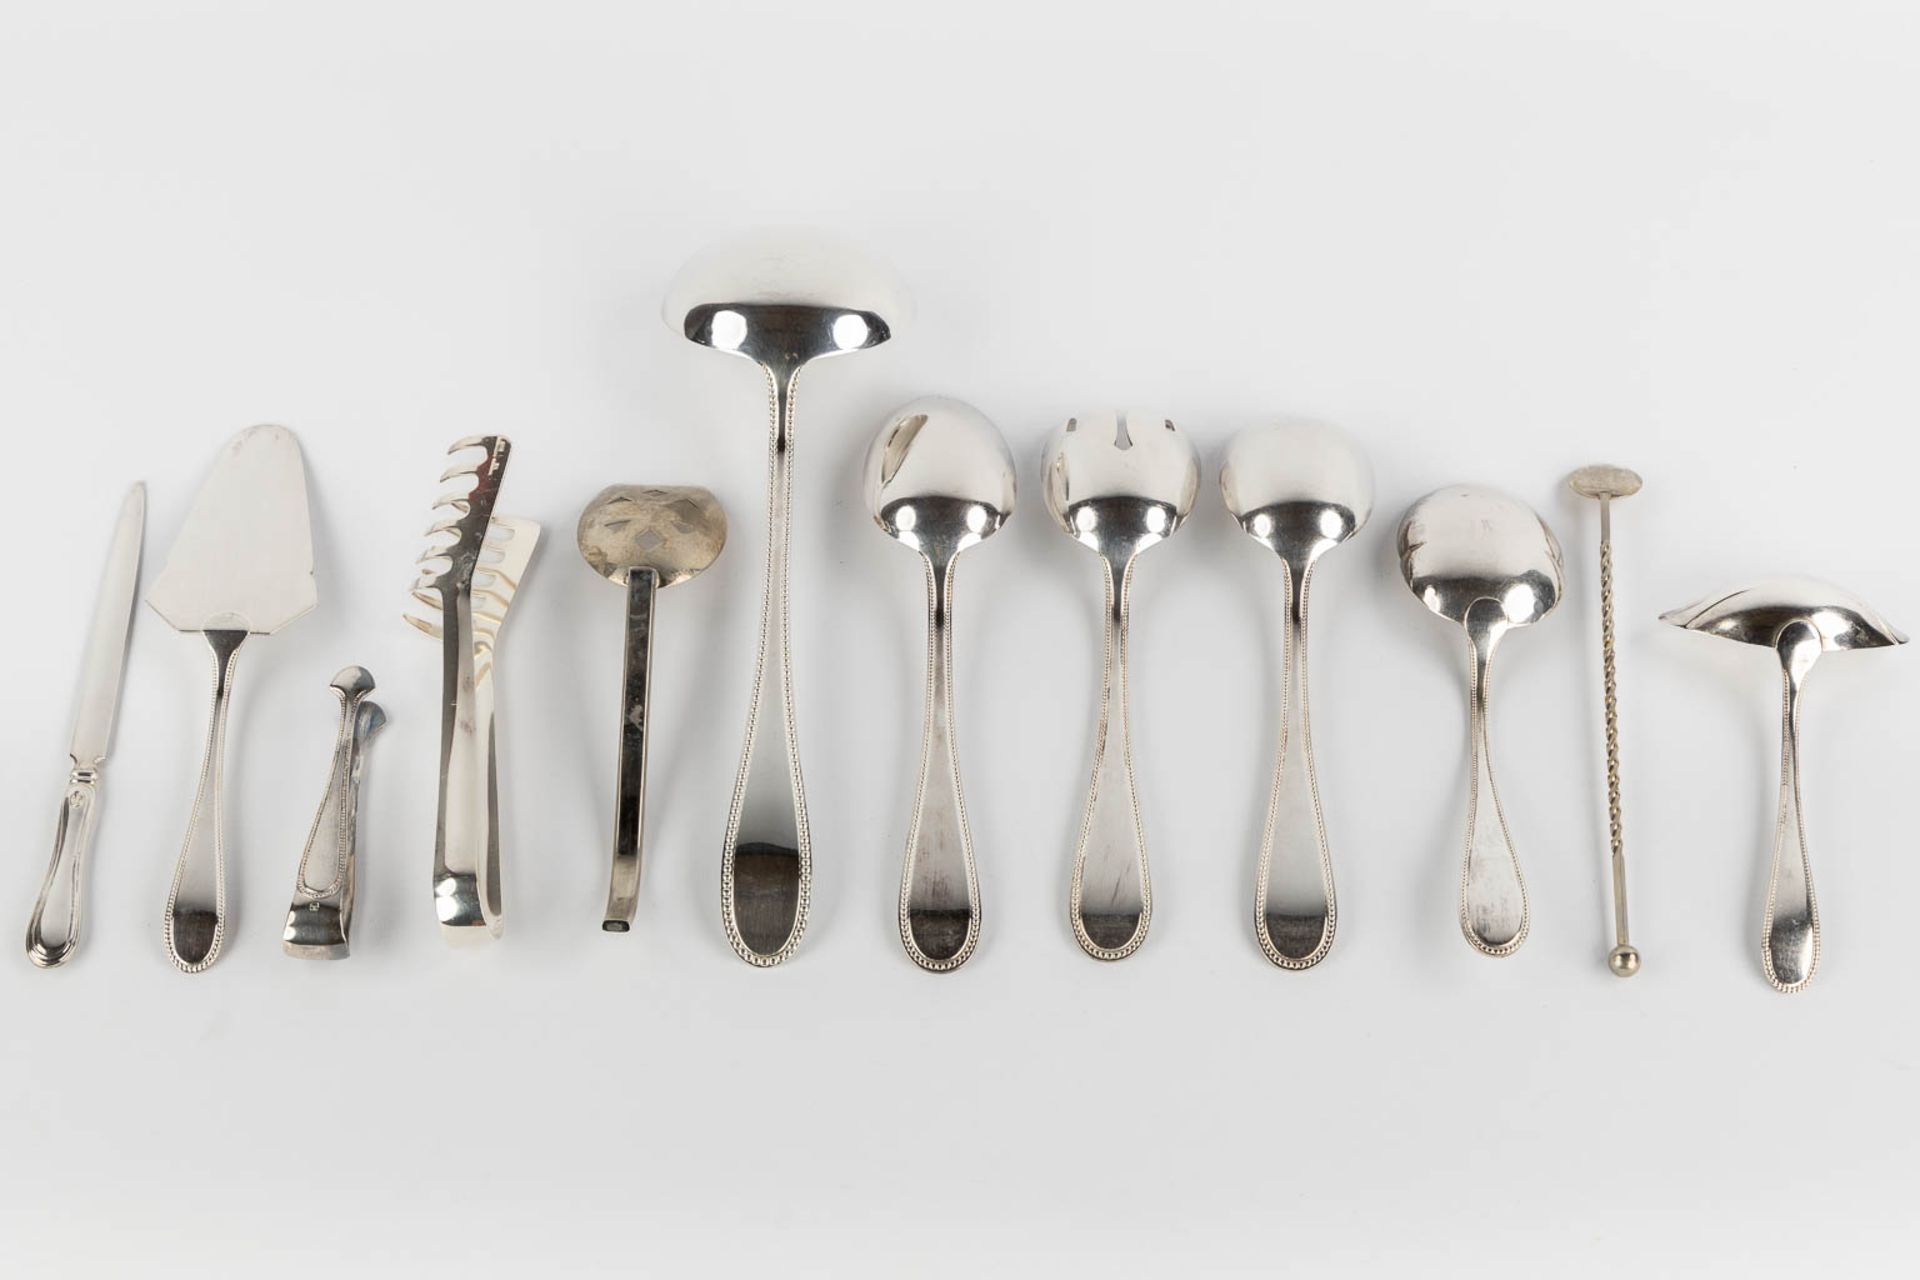 Francois Frionnet, a 12-person, 144-piece silver-plated cutlery. (L:32 x W:46 x H:28 cm) - Image 4 of 17